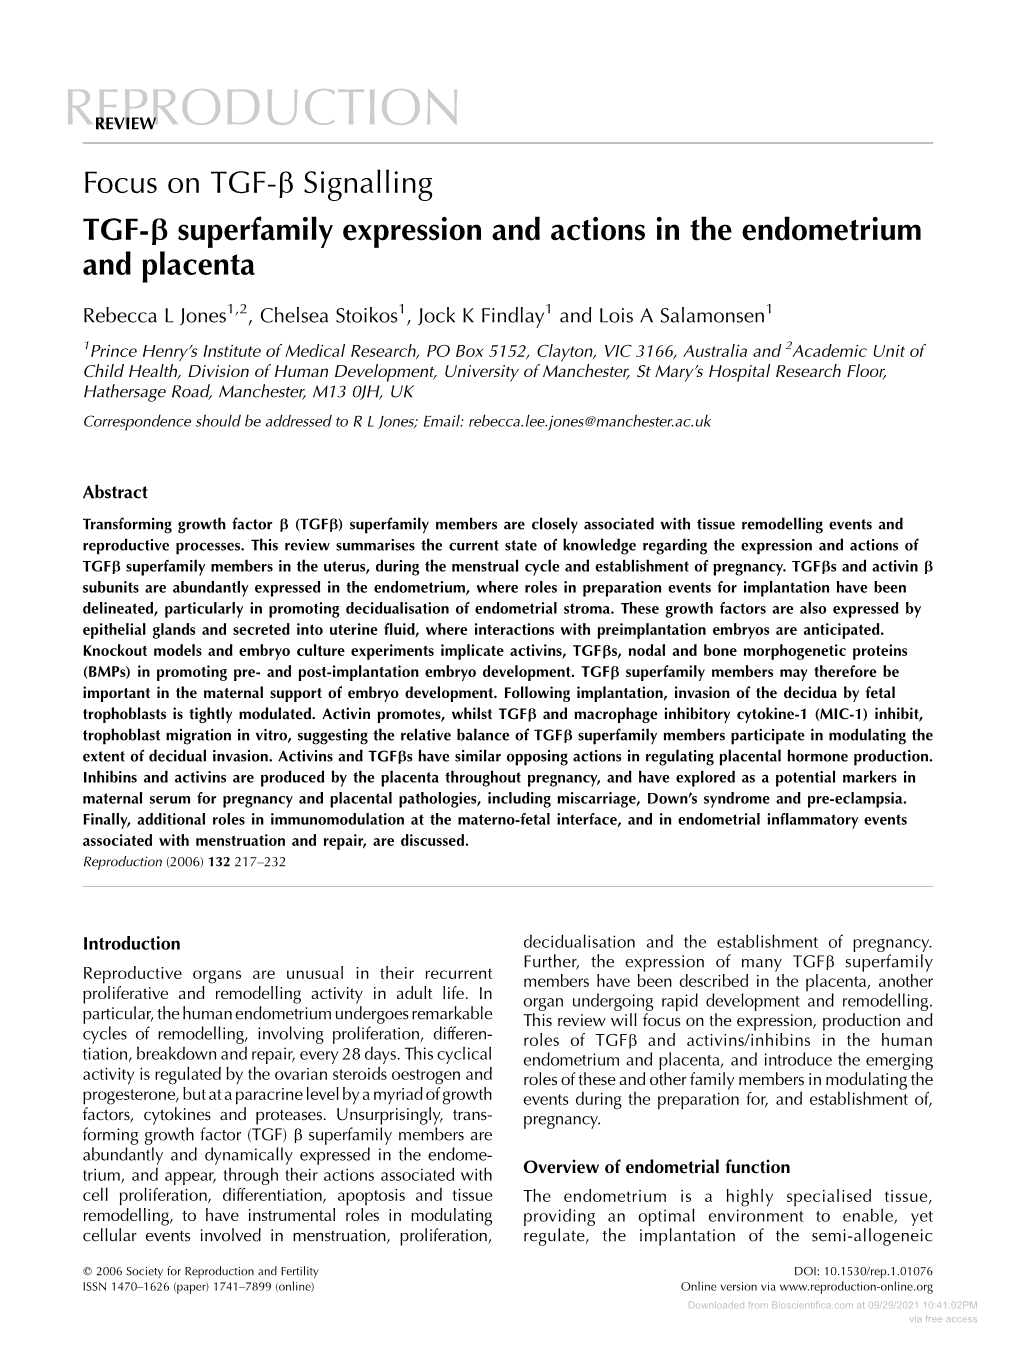 Focus on TGF-B Signalling TGF-B Superfamily Expression and Actions in the Endometrium and Placenta